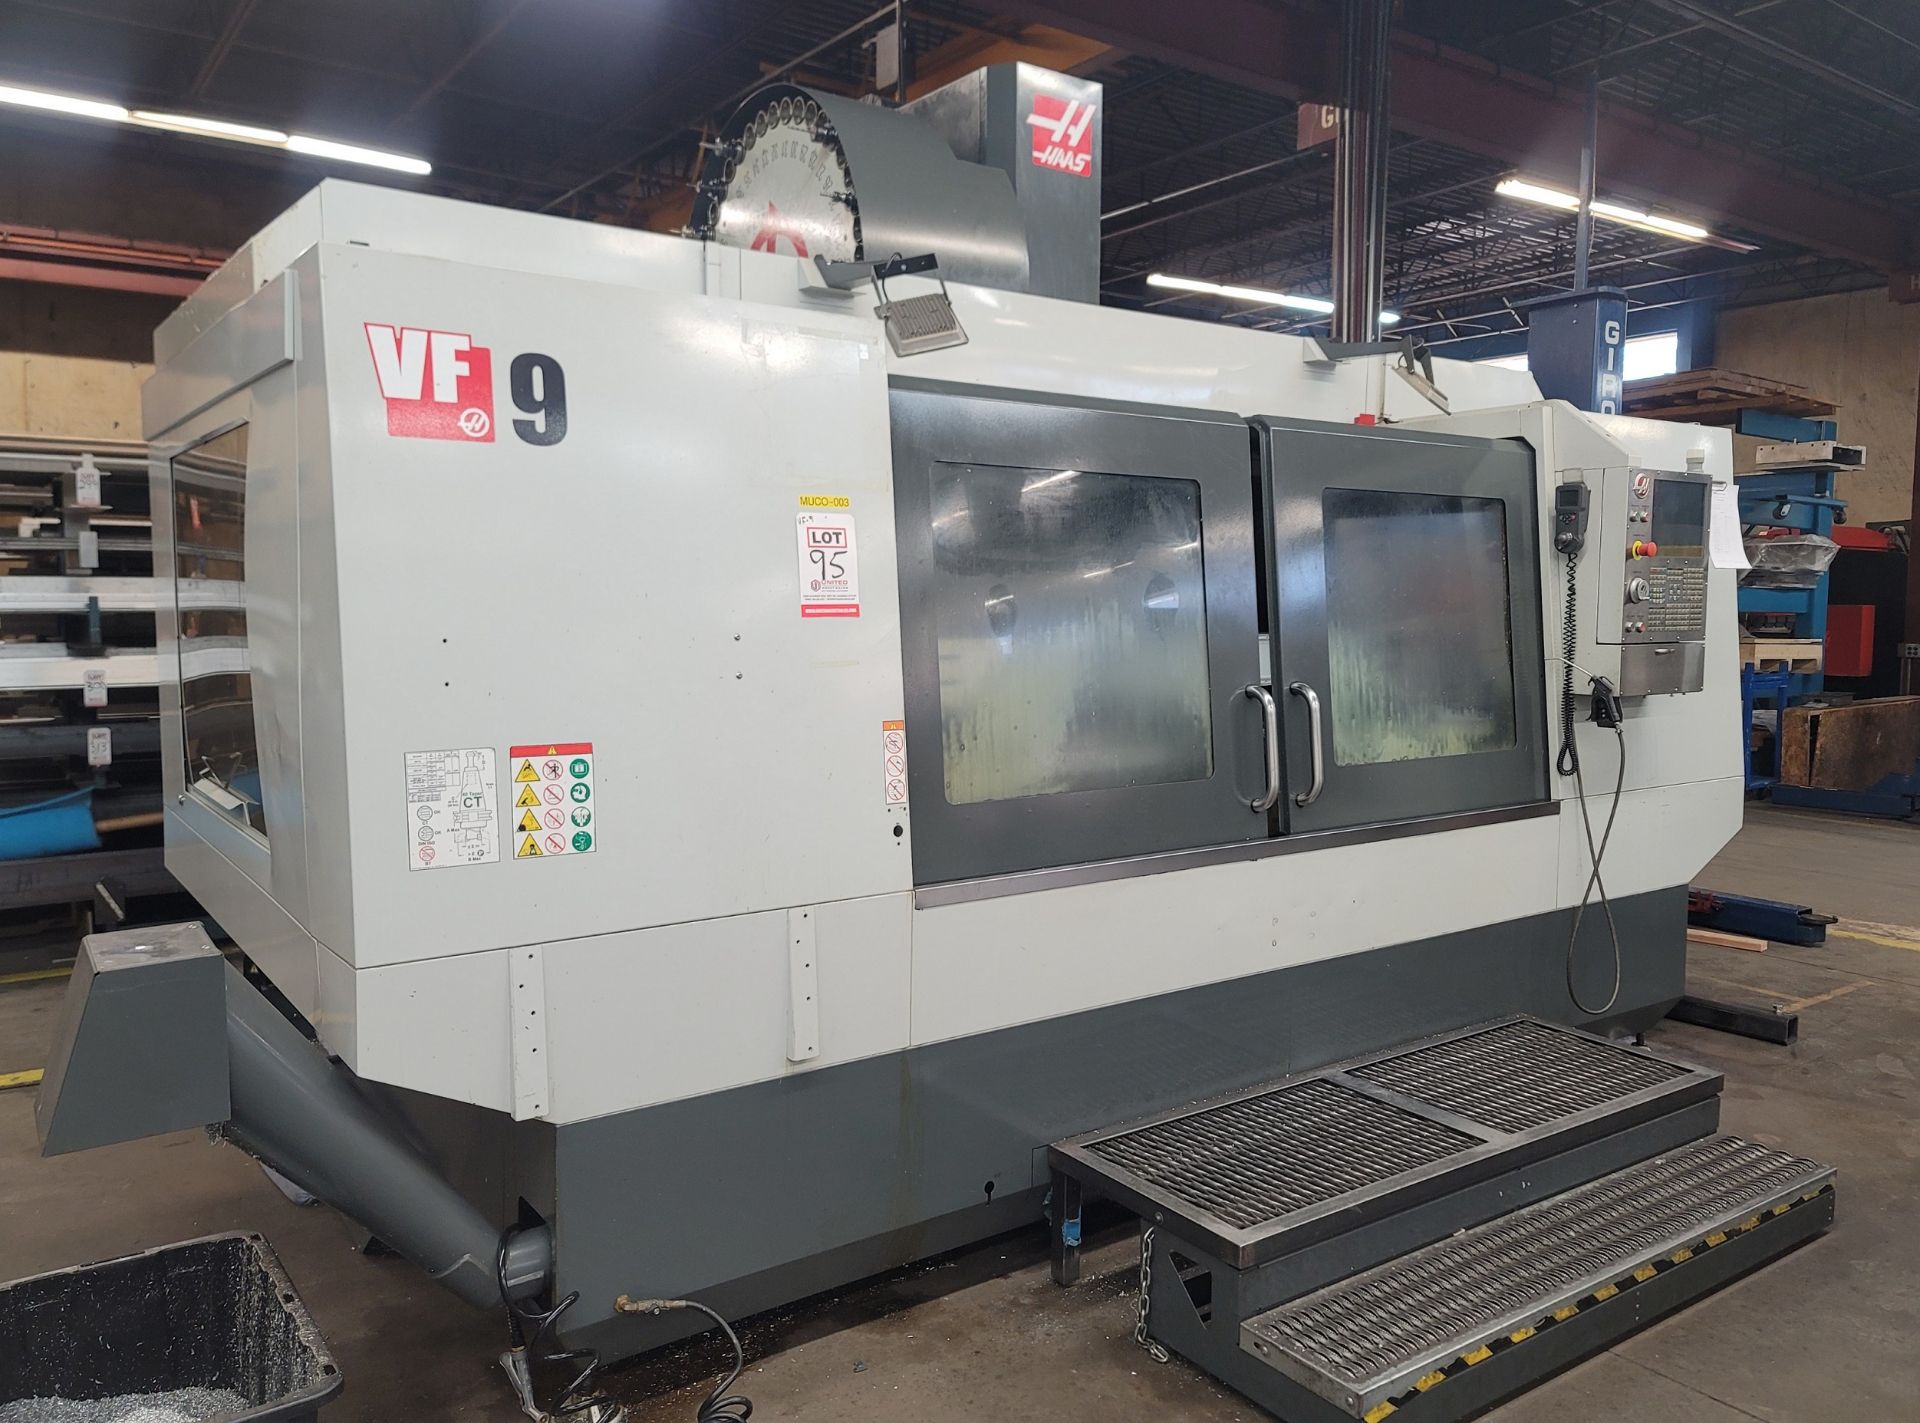 2017 HAAS VF-9/40 VERTICAL MACHINING CENTER, XYZ TRAVELS: 84" X 40" X 30", 84" X 36" TABLE, 8100 RPM - Image 3 of 28